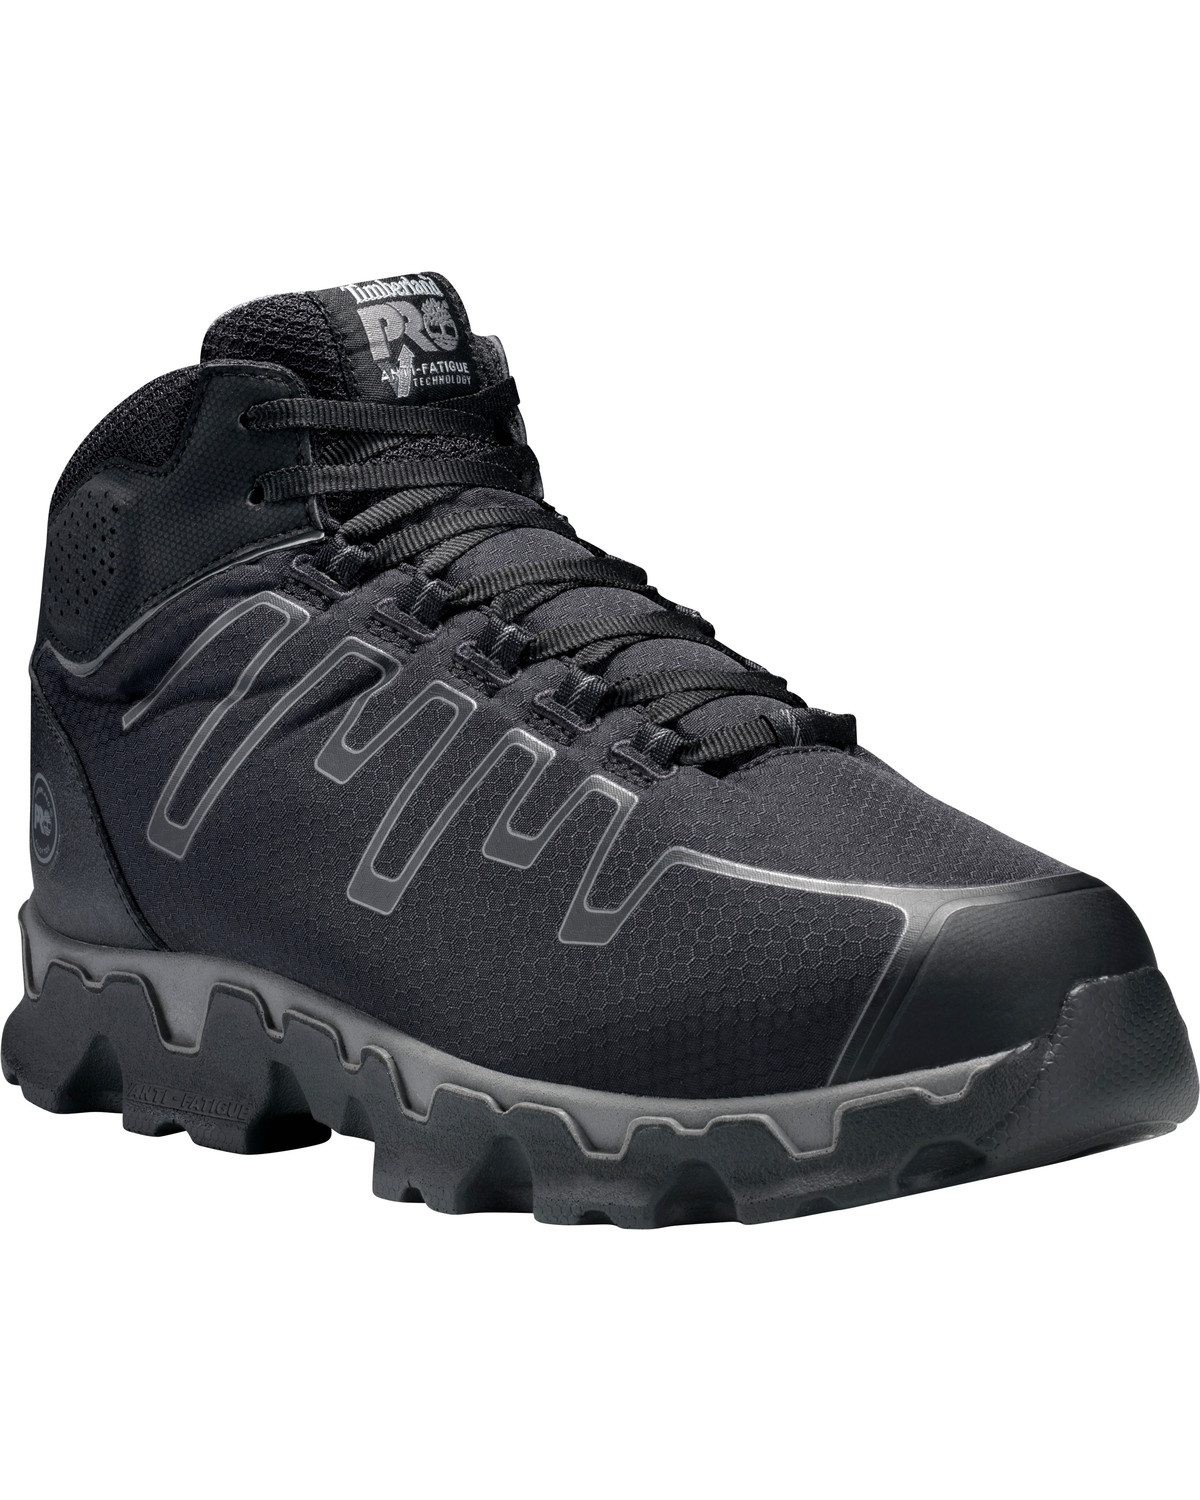 Timberland Pro Men's Powertrain Mid EH Work Shoes - Alloy Toe